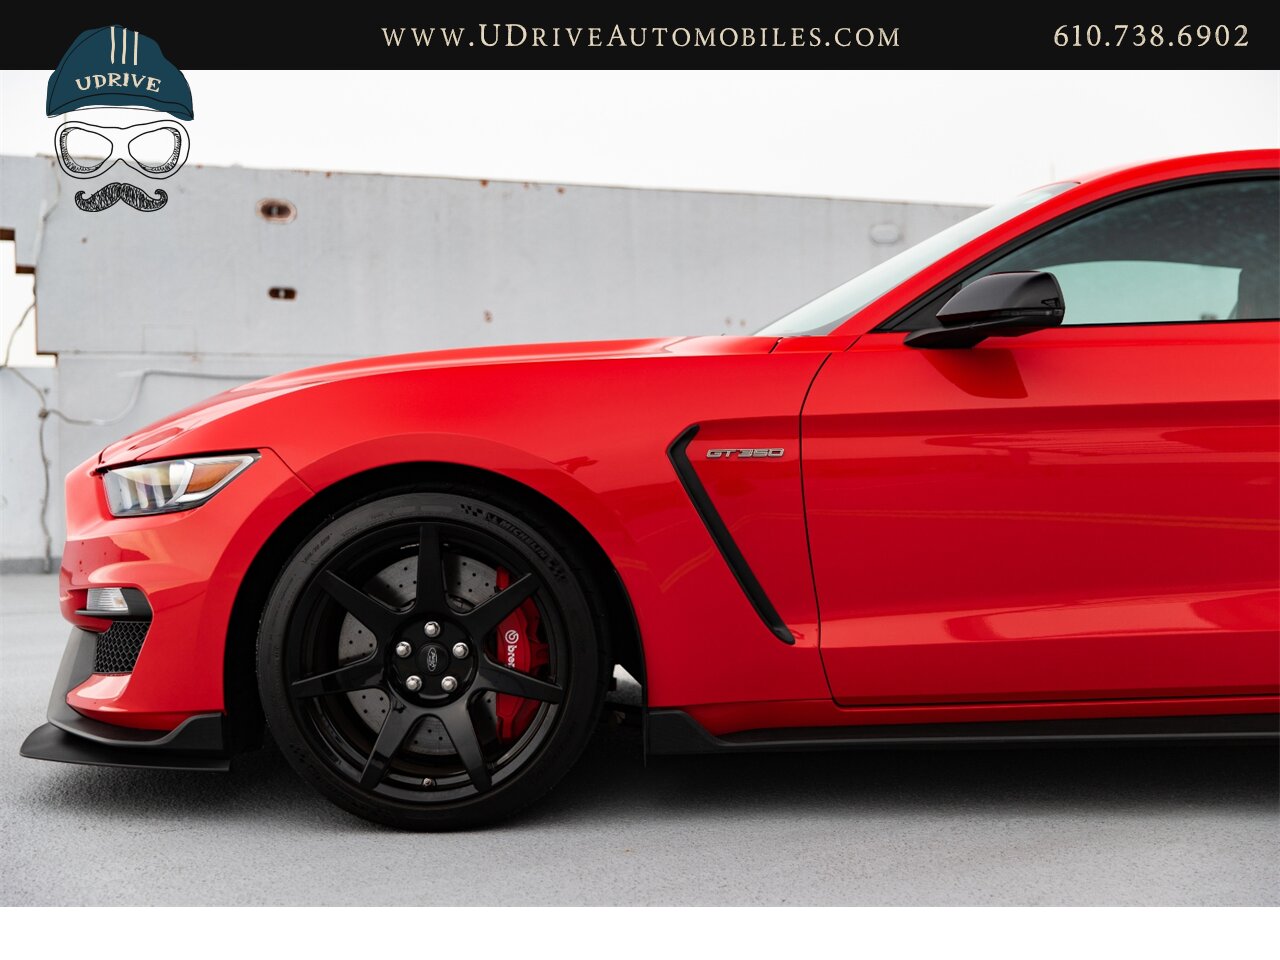 2016 Ford Mustang Shelby GT350R 3k Miles Electronics Pkg  1 of 32 Race Red Produced for USA As New - Photo 8 - West Chester, PA 19382